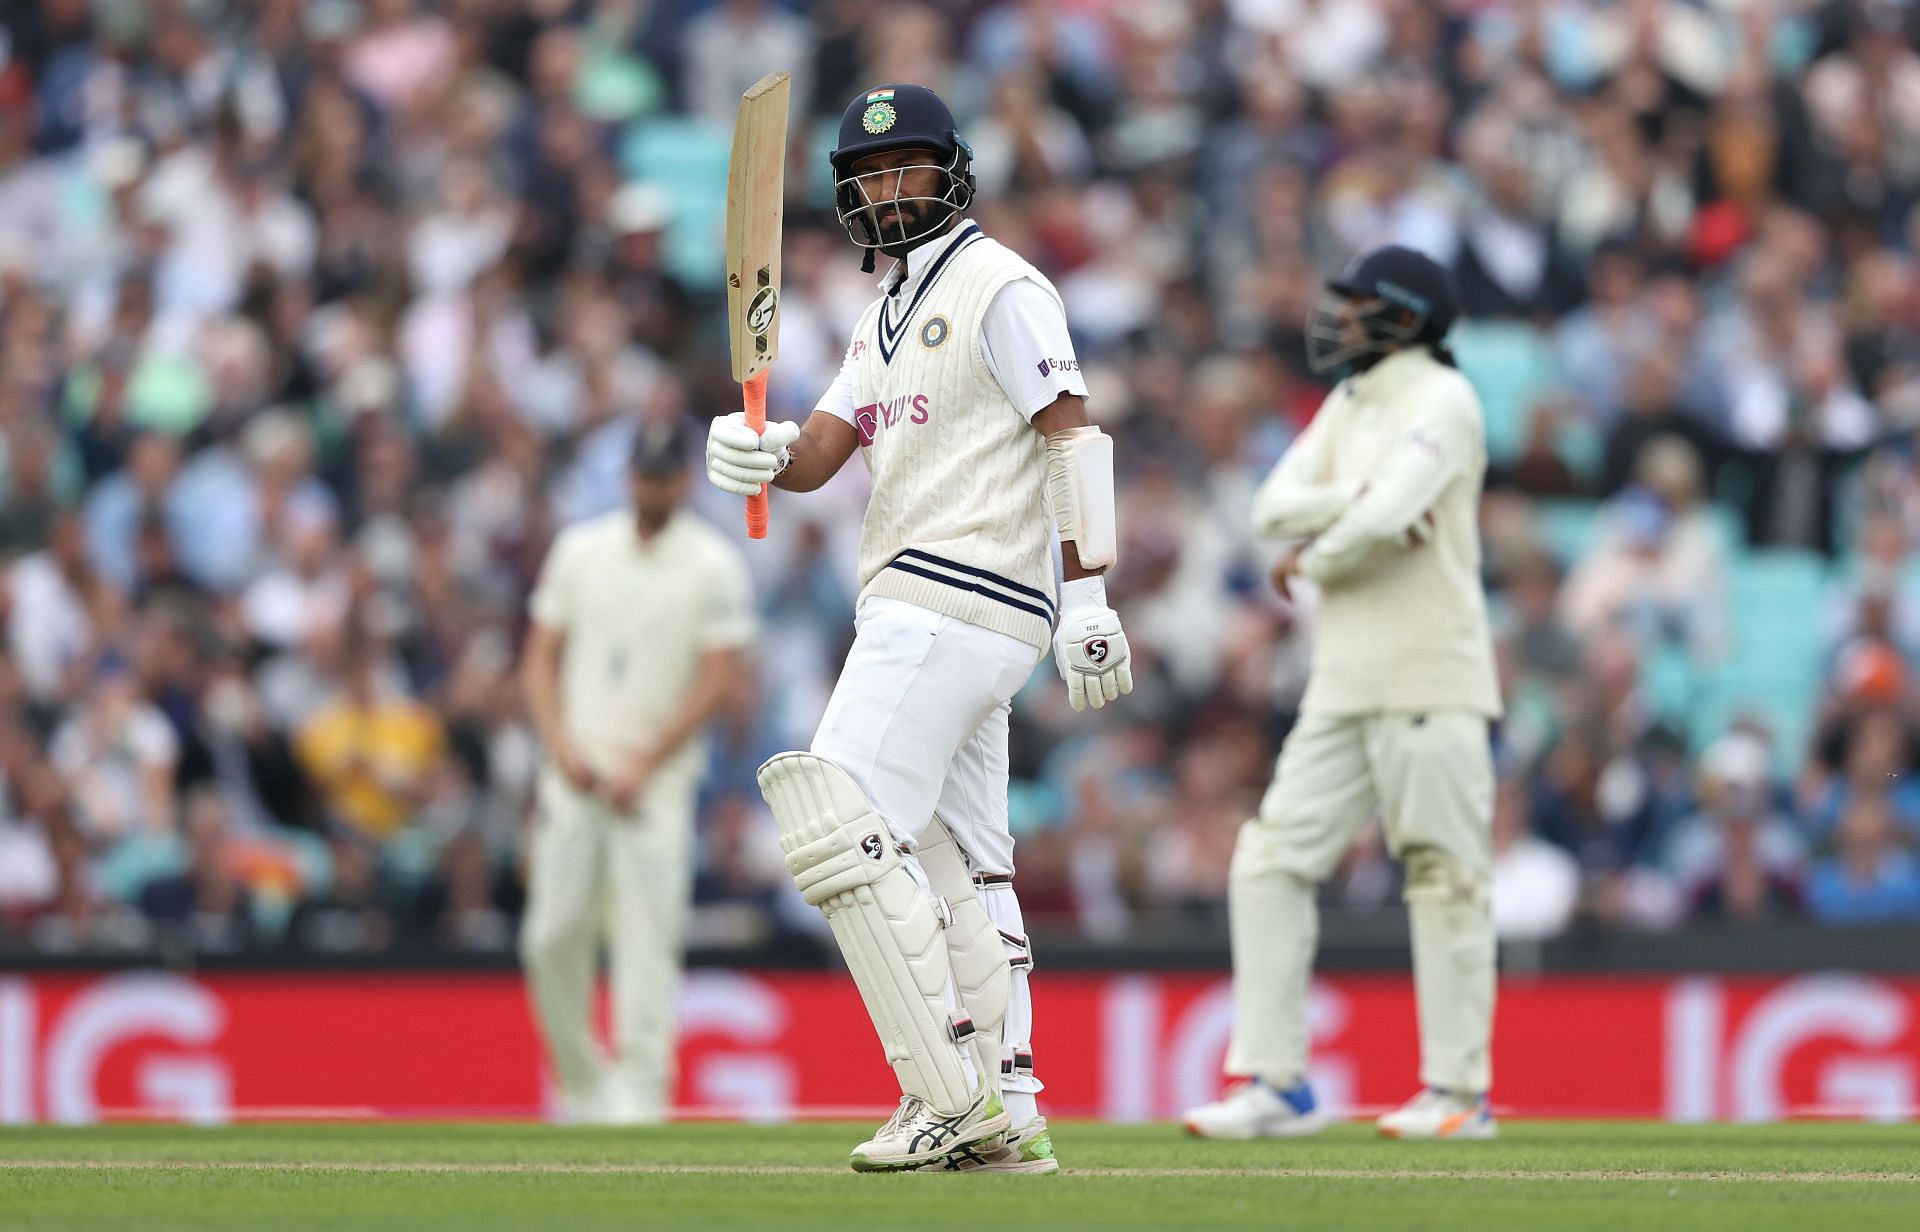 Cheteshwar Pujara played an aggressive brand of cricket for India against England (Credit: Getty Images)